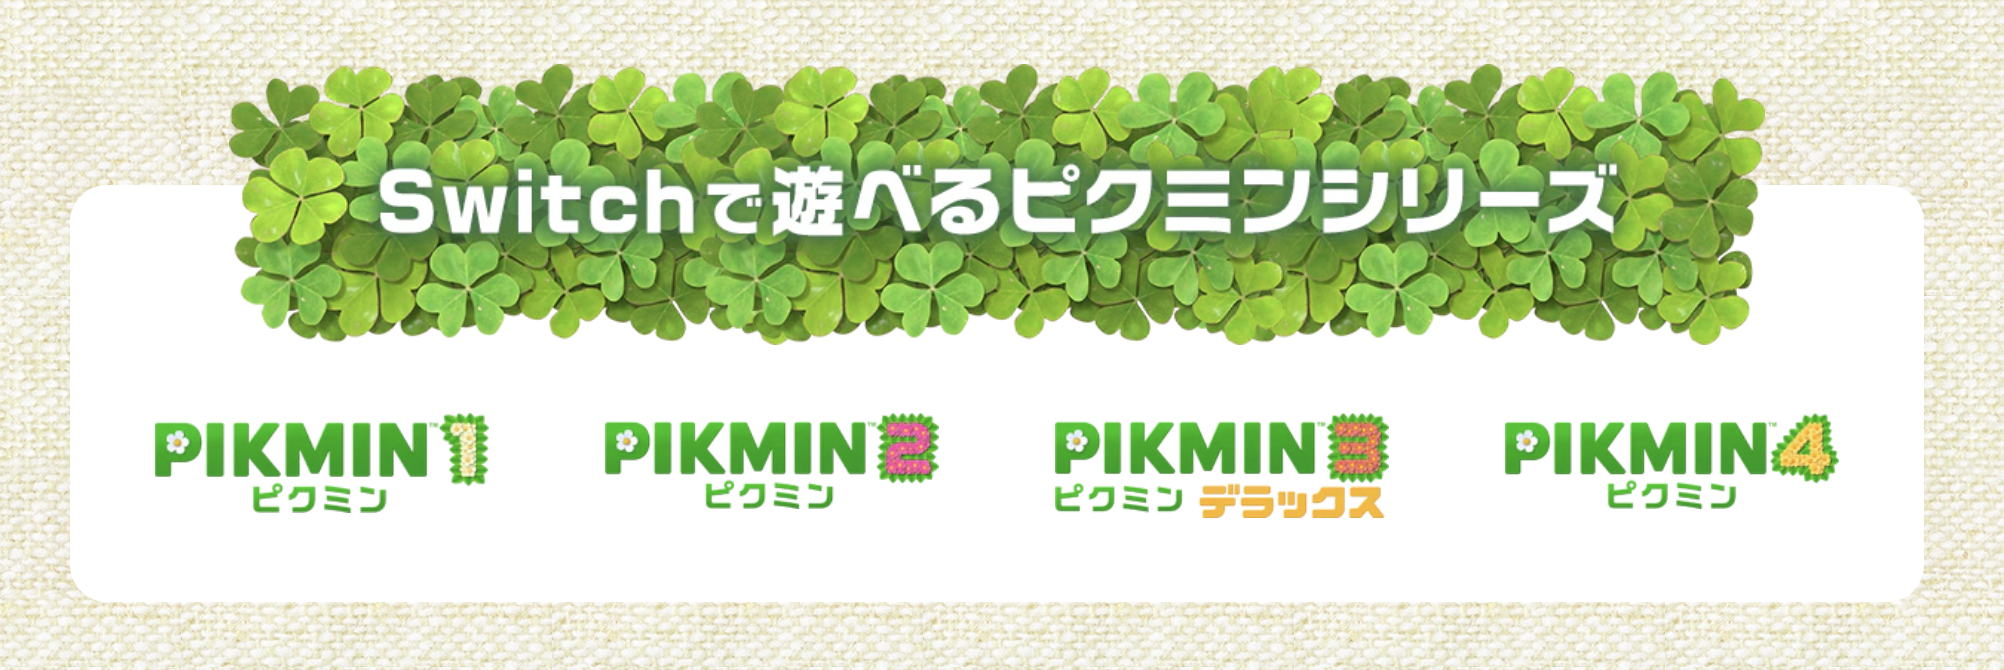 Pikmin 1, 2 Available Now on Switch, Physical Version Coming in September -  : Japan-based Nintendo Podcasts, Videos & Reviews!